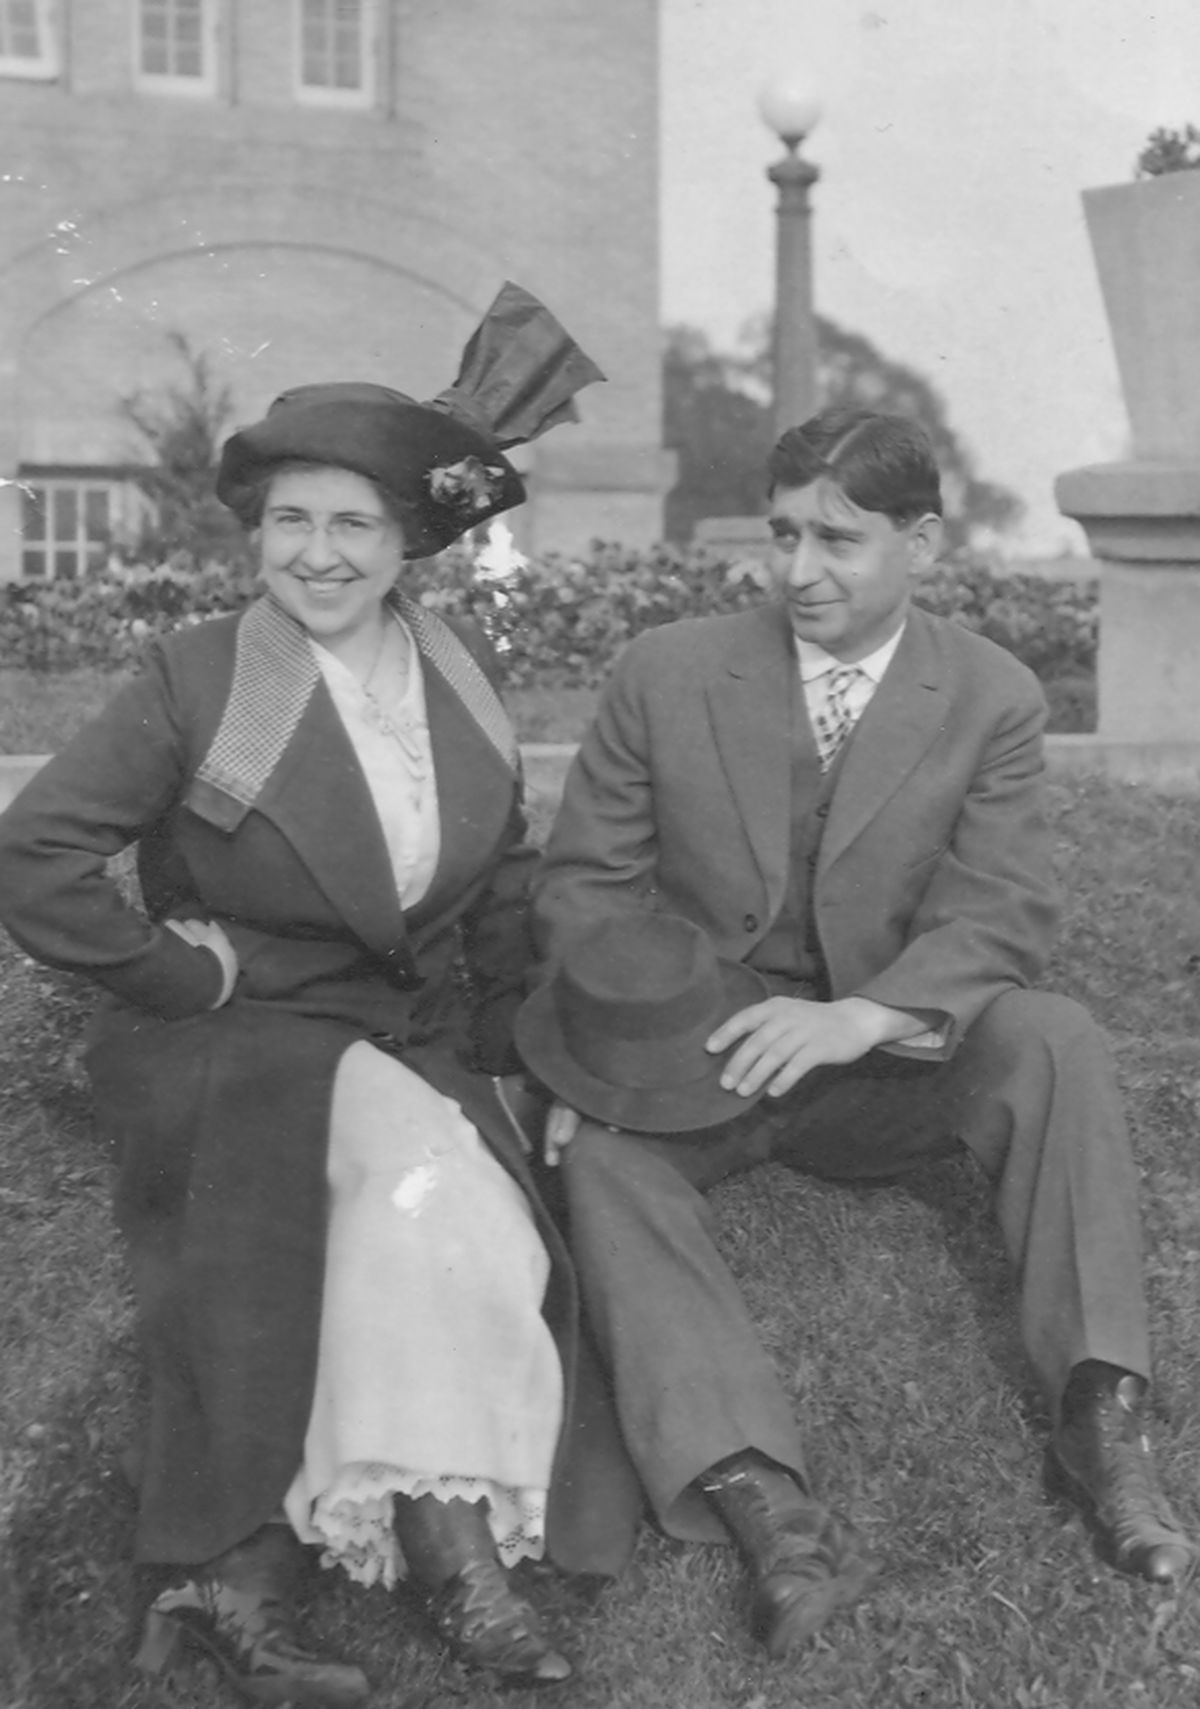 Reporter Jonathan Brunt’s great-grandparents Mary and Alois Yeager pictured in 1914.Courtesy of Jonathan Brunt (Courtesy of Jonathan Brunt / The Spokesman-Review)